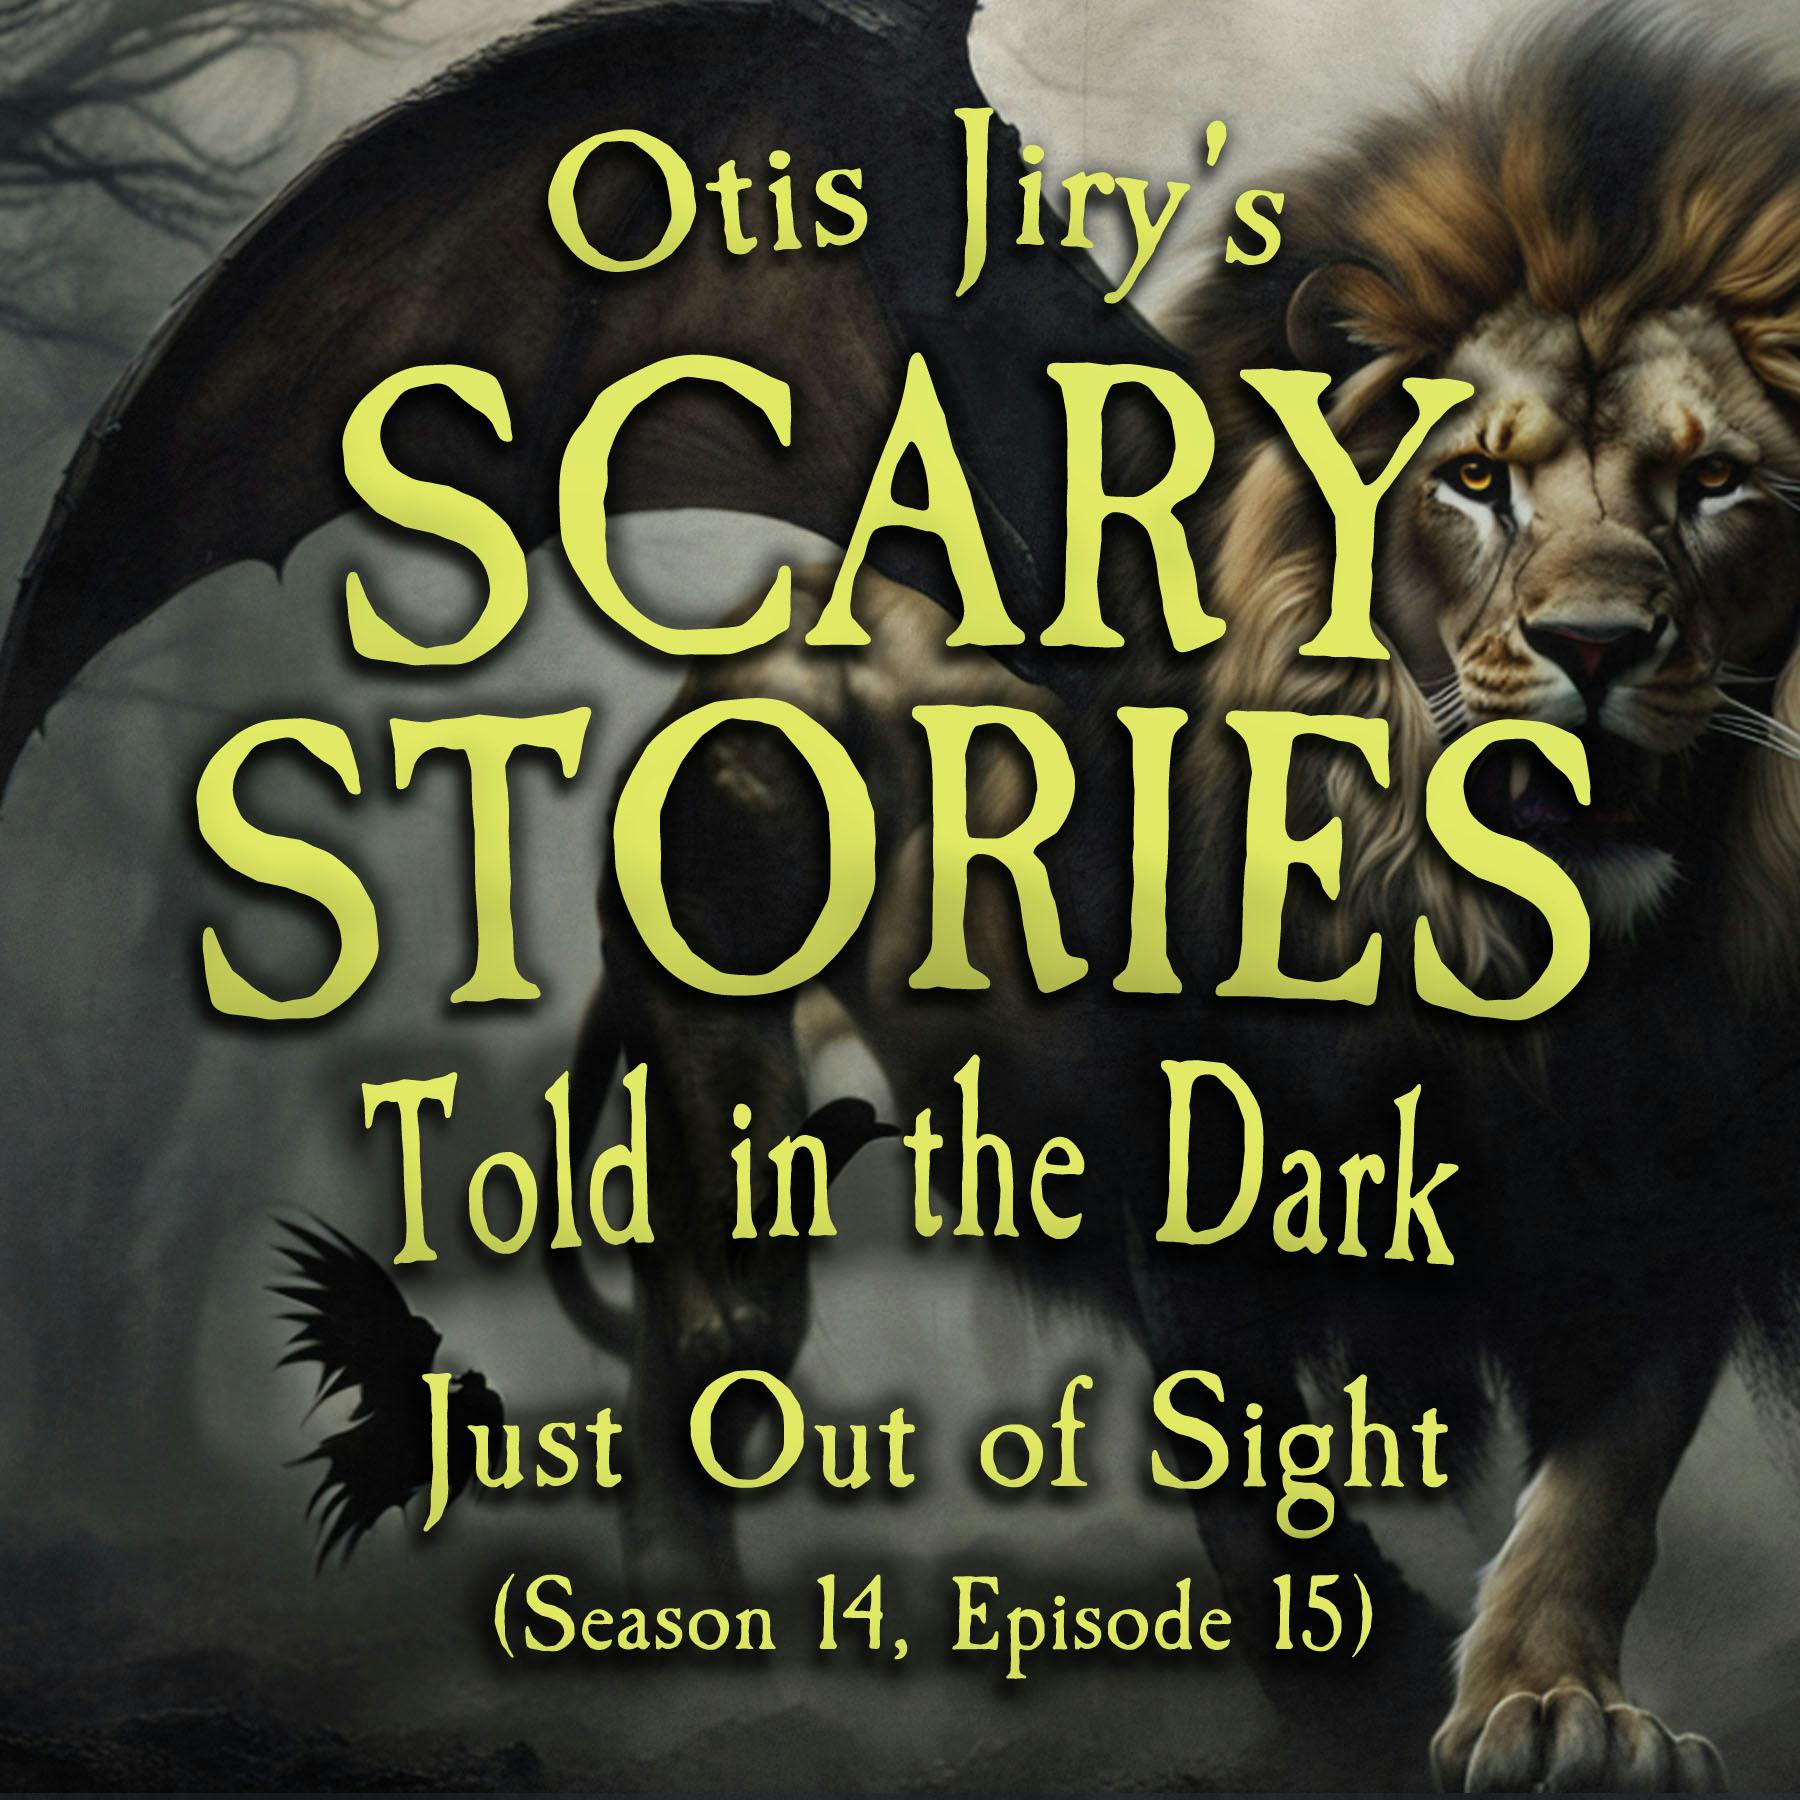 S14E15 - ”Just Out of Sight” – Scary Stories Told in the Dark